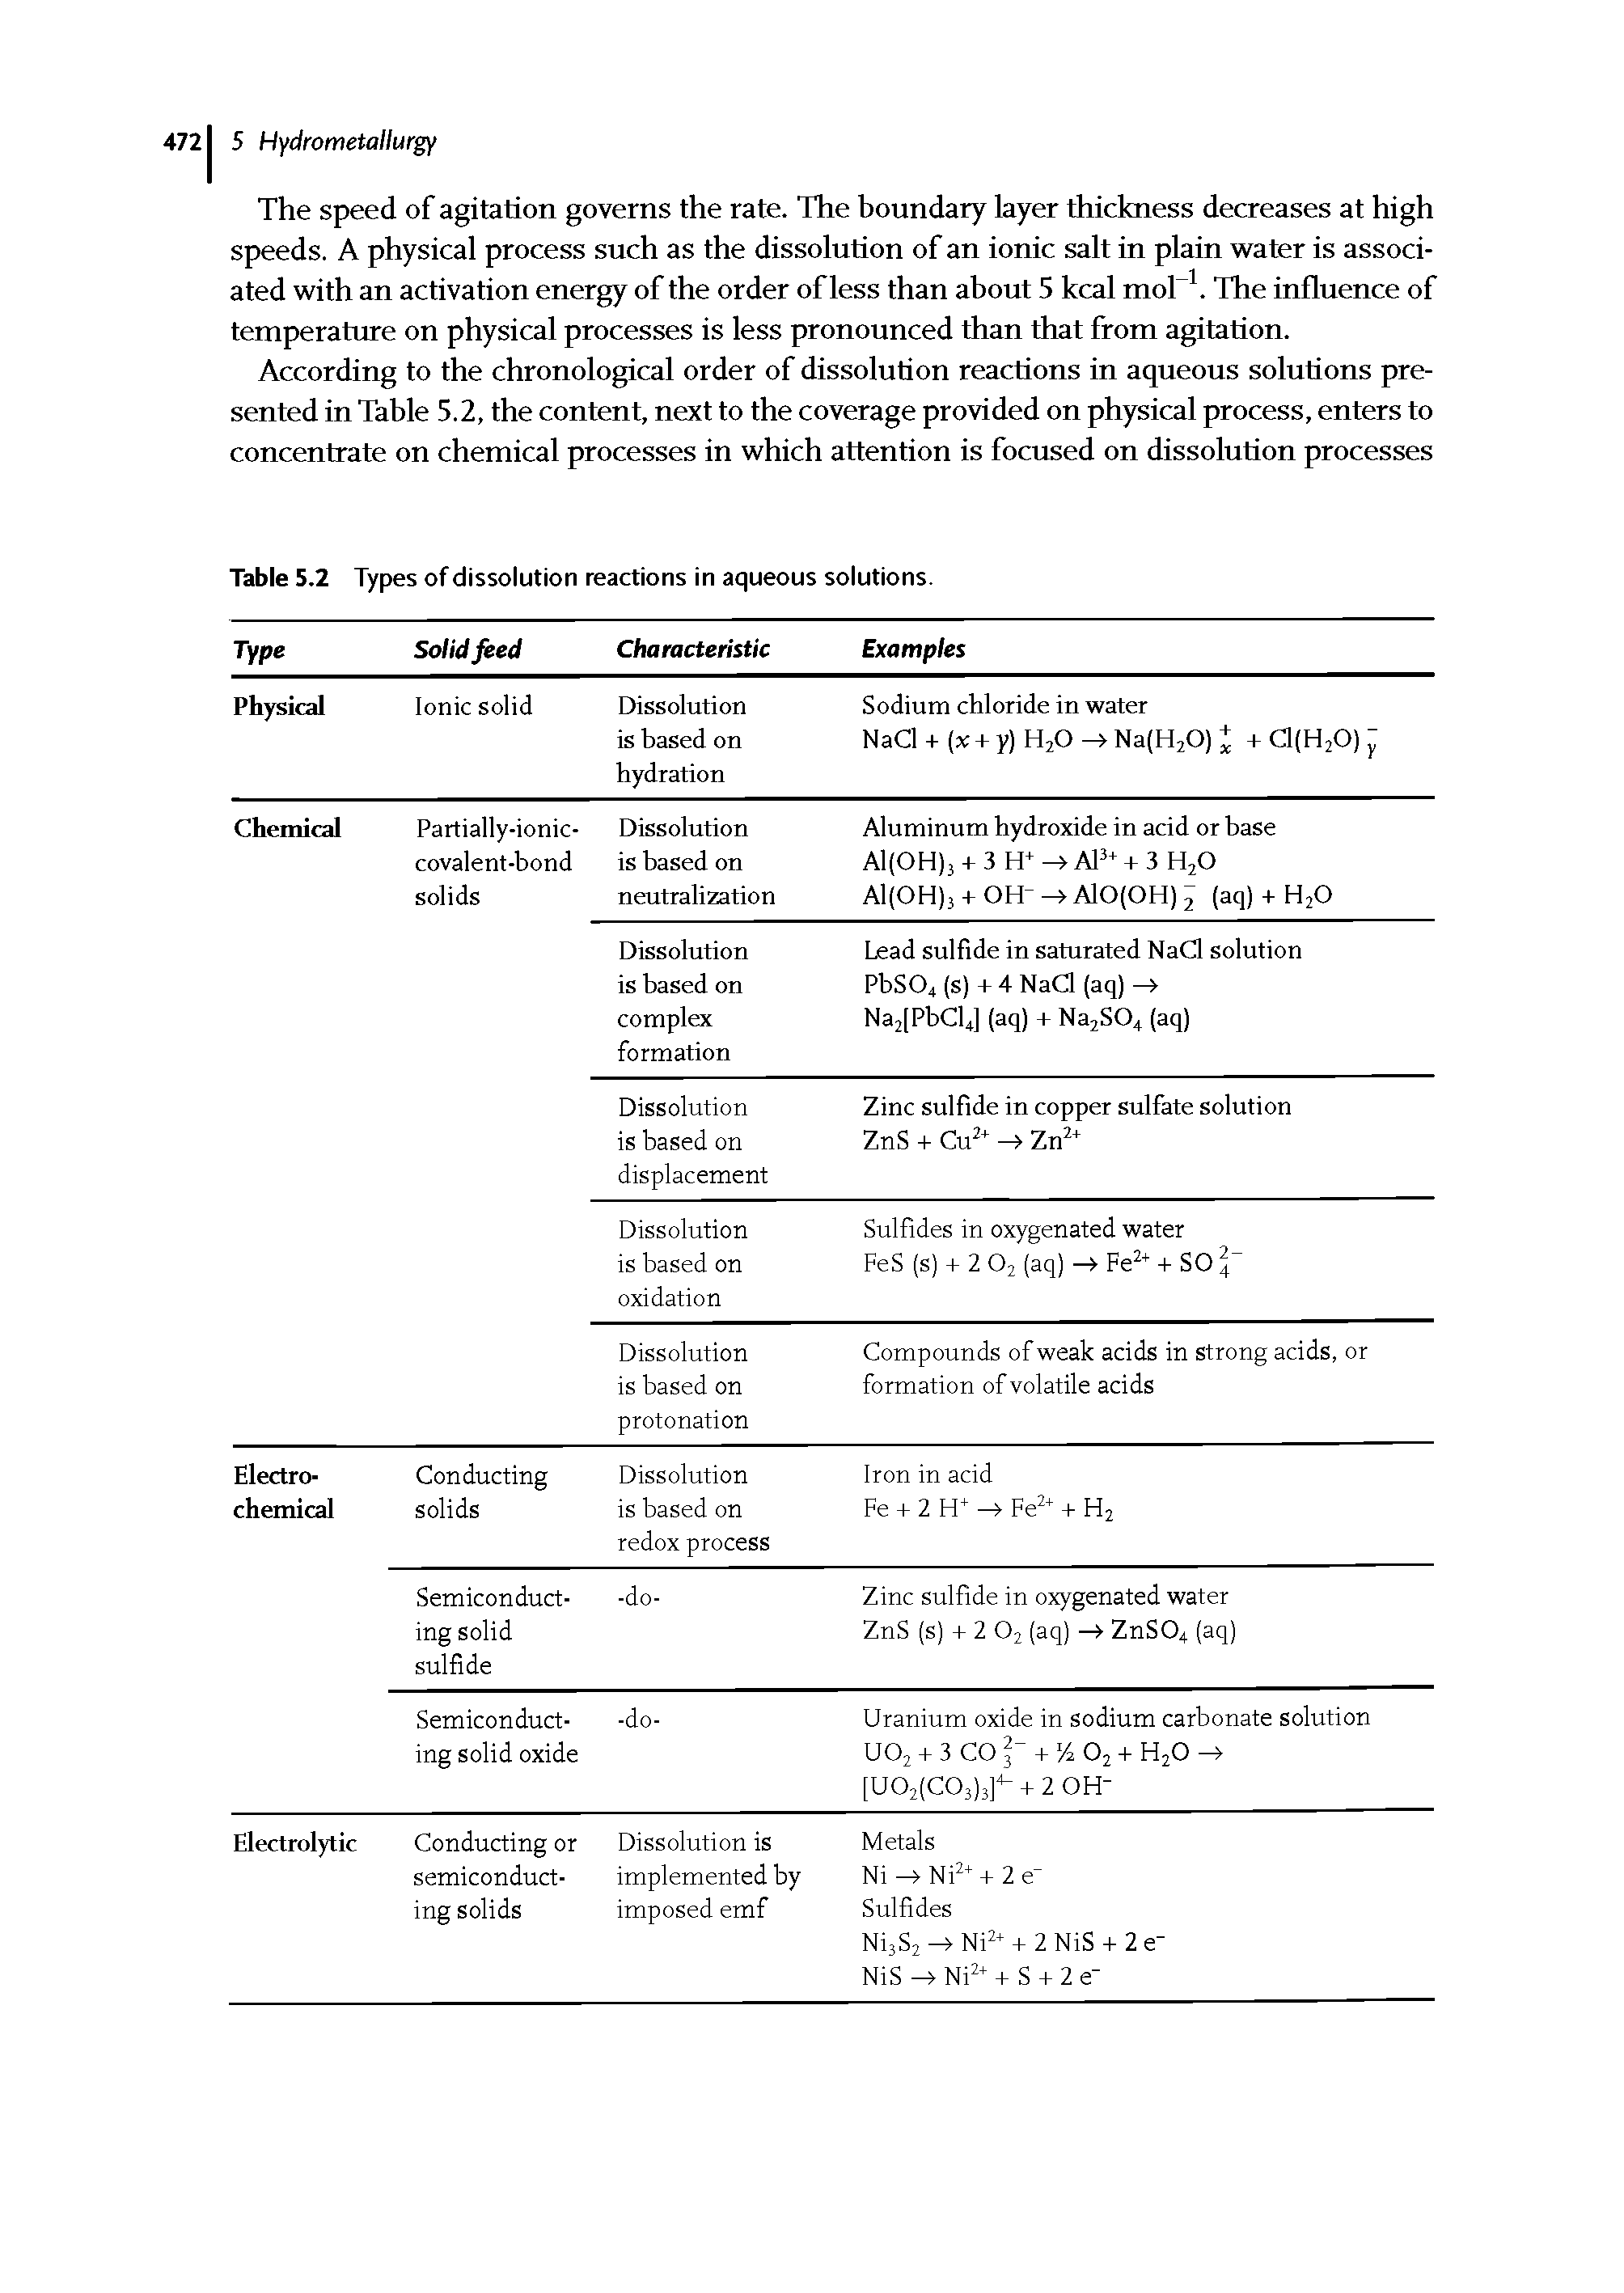 Table 5.2 Types of dissolution reactions in aqueous solutions.